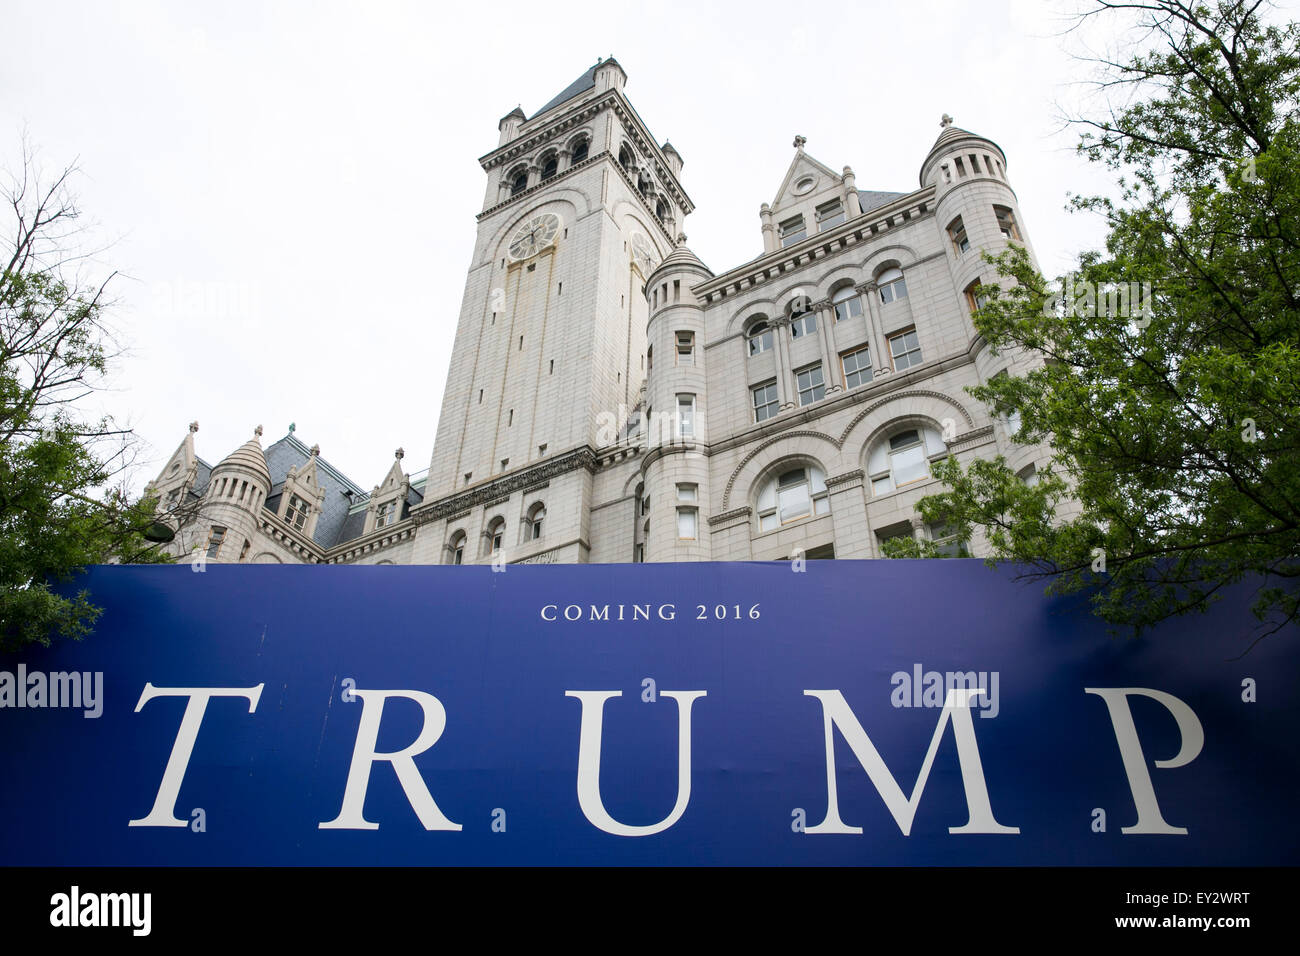 Donald Trump logo signs surrounding the Old Post Office Pavilion, currently being converted into a Trump International Hotel, in Stock Photo